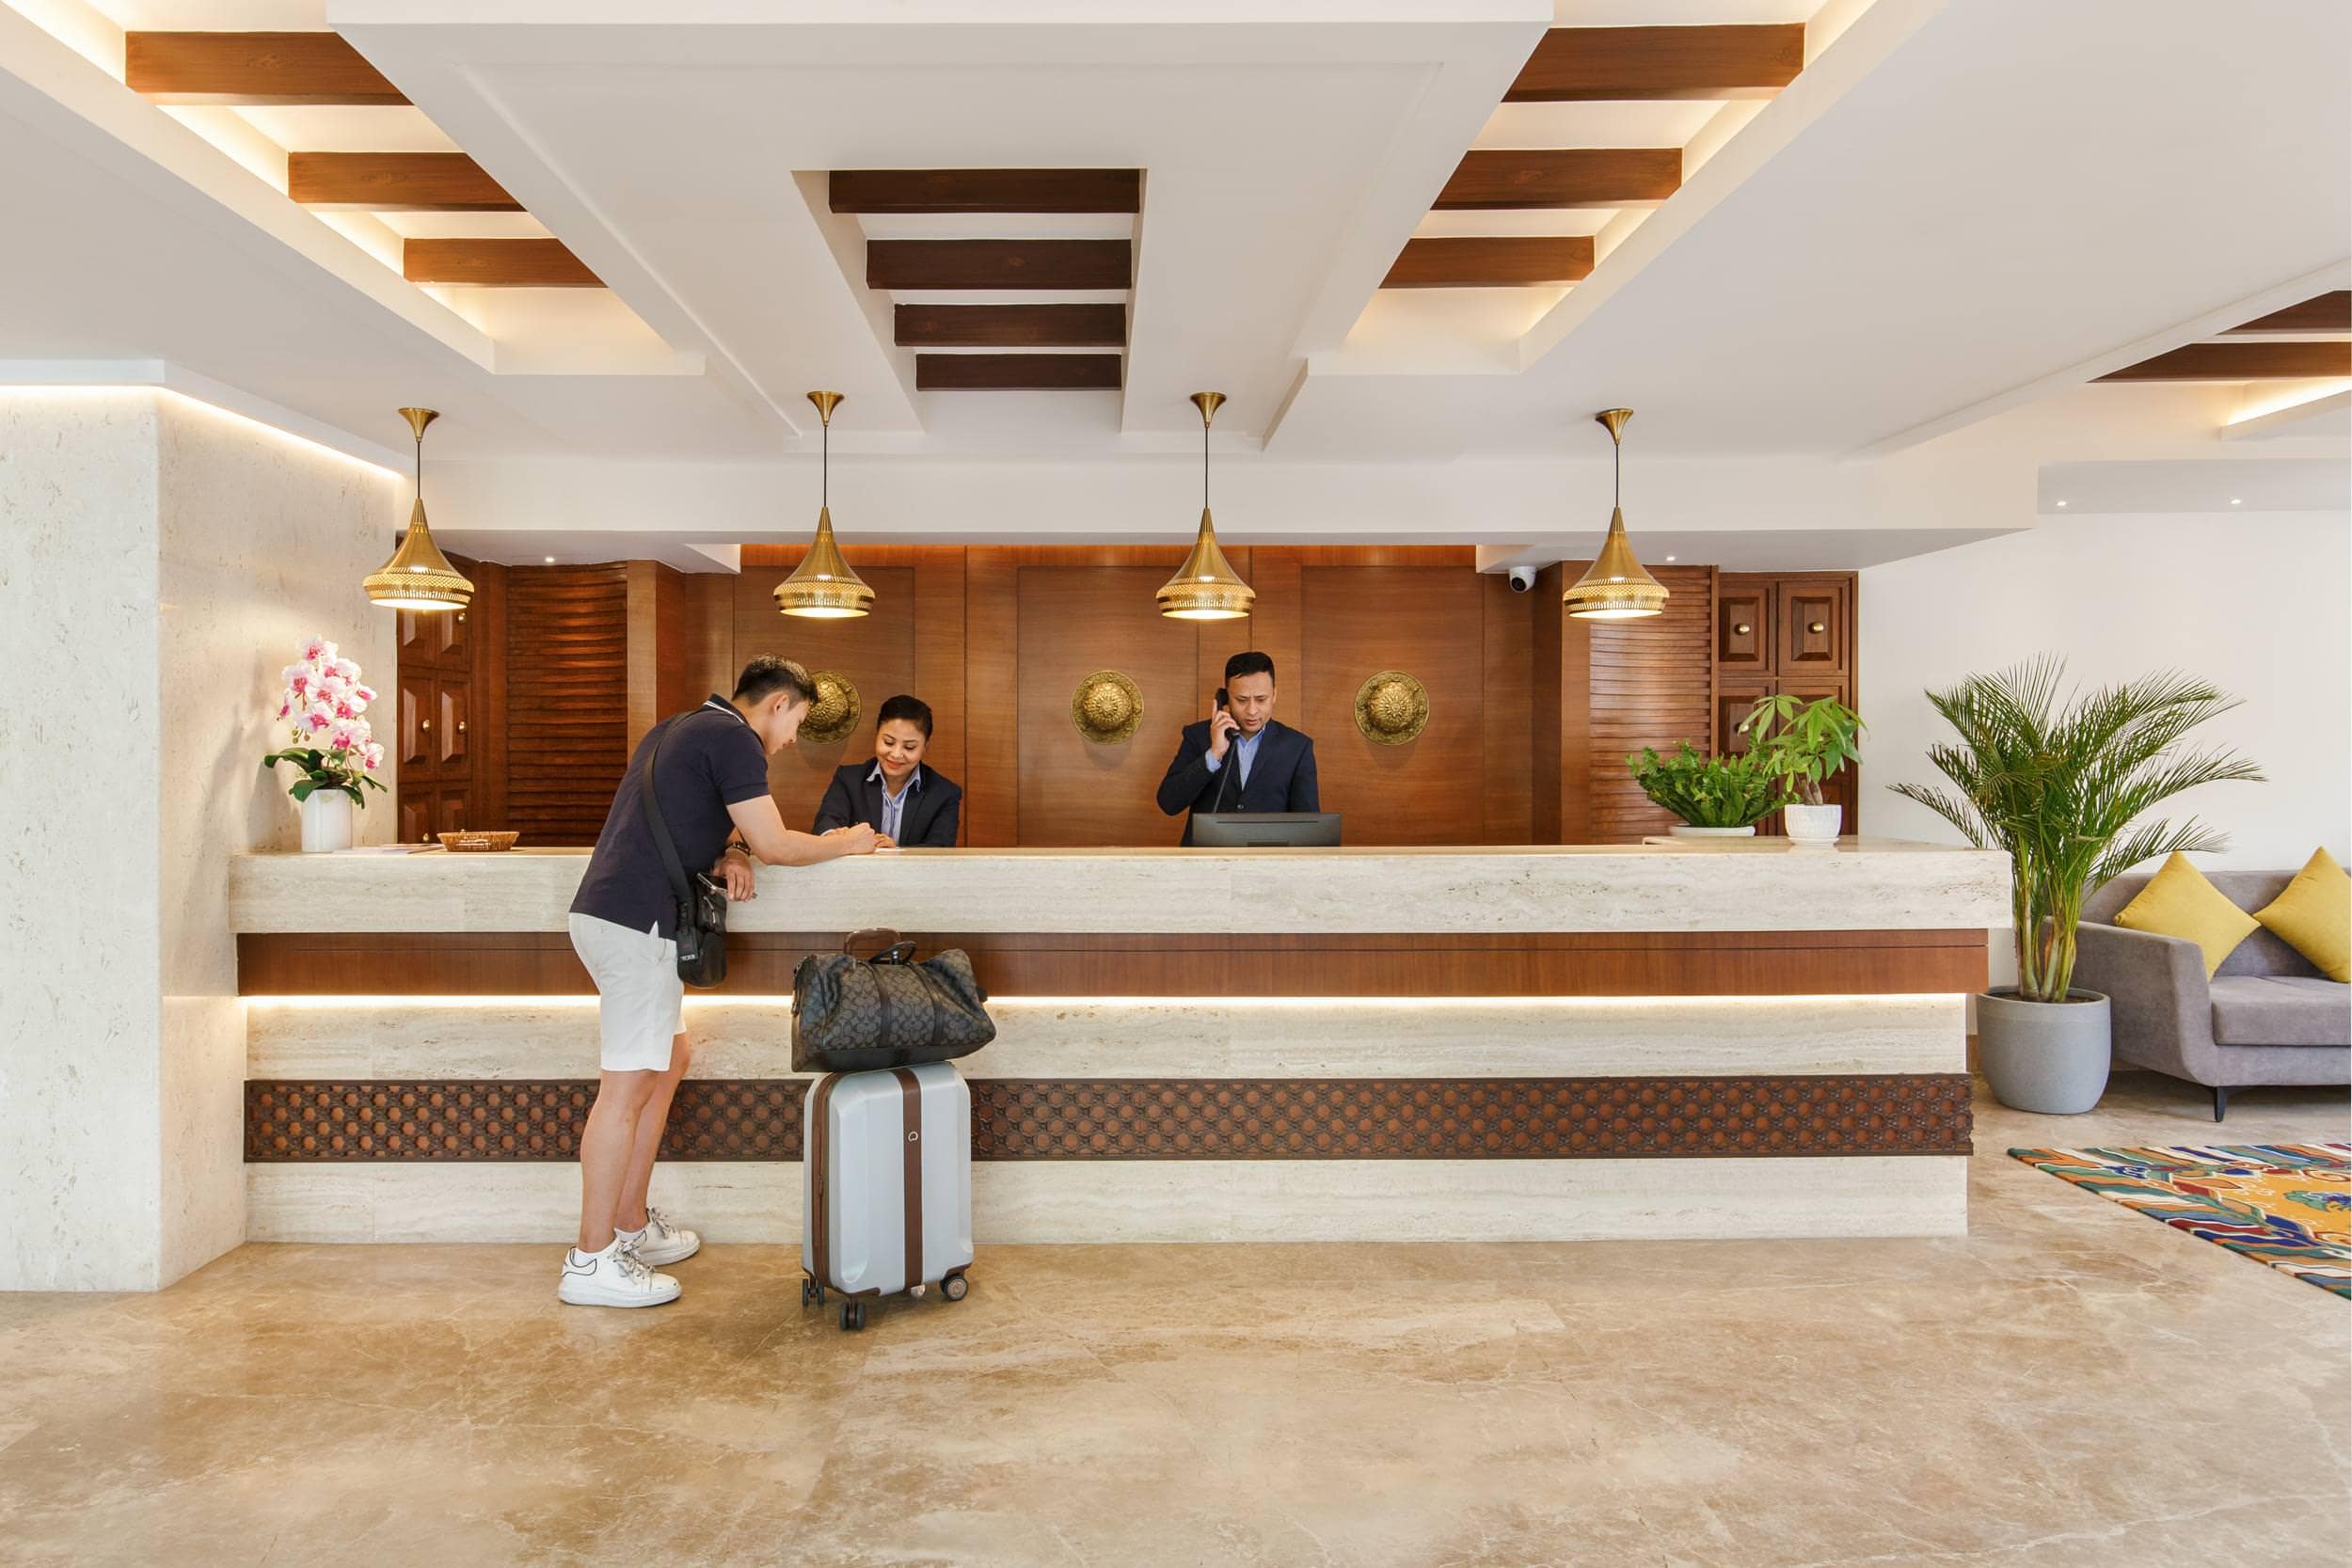 Check-in to a Tropical Resort in the city